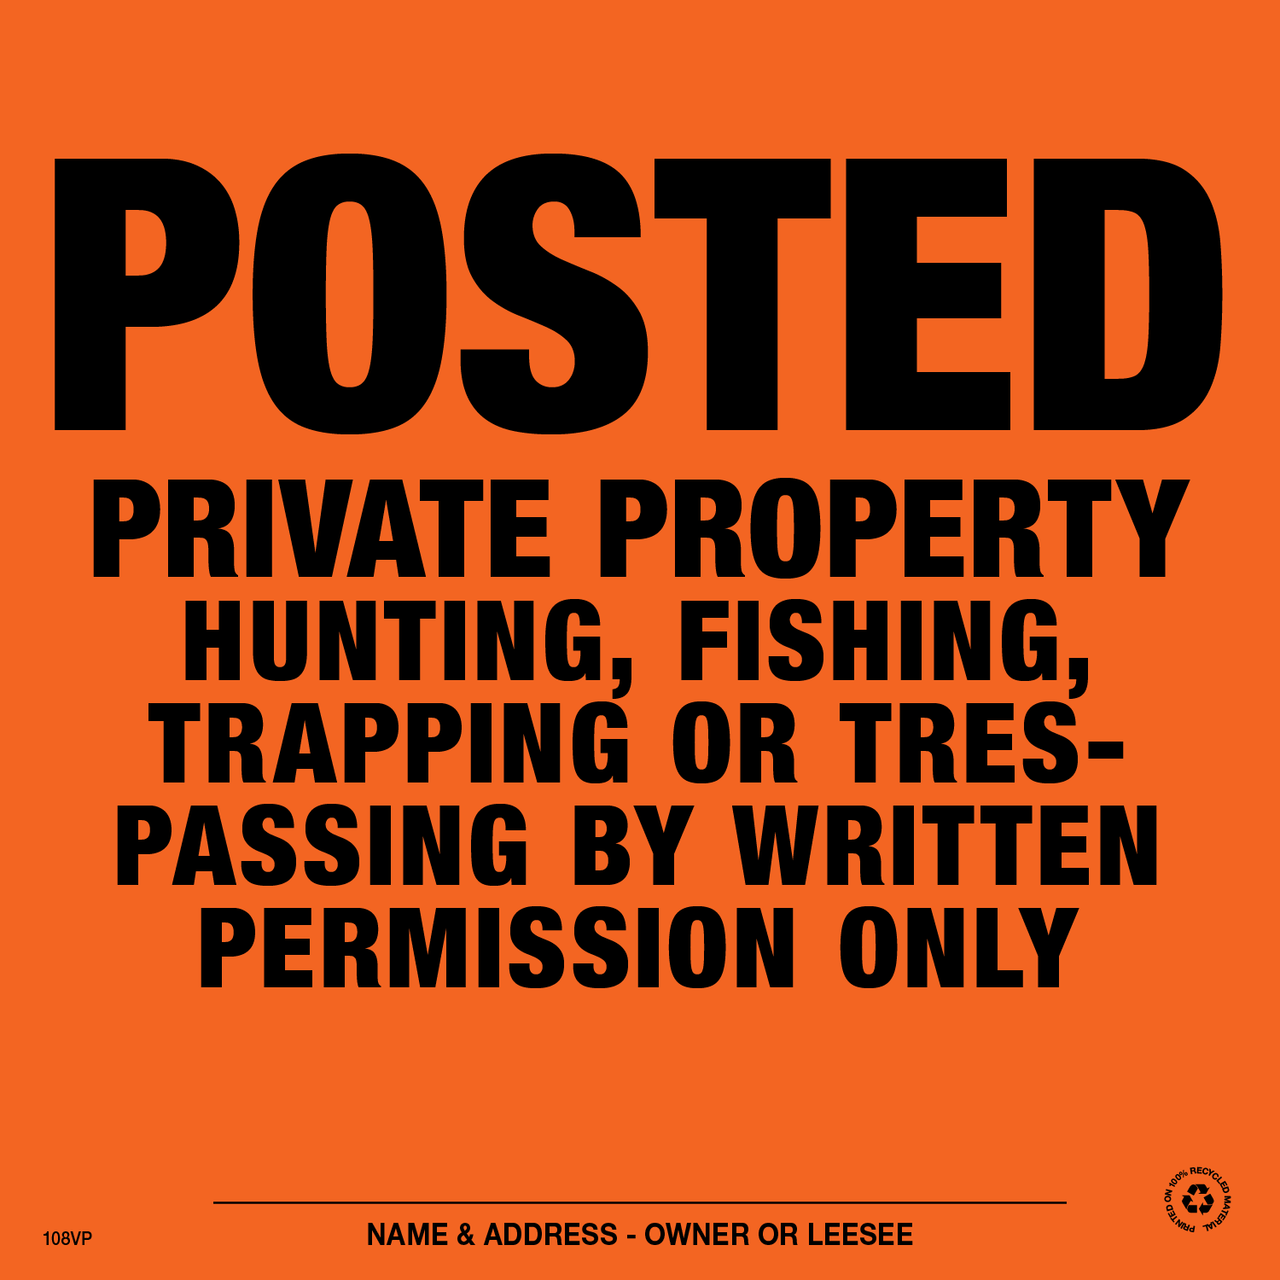 Posted Written Permission Only Posted Signs - Orange Aluminum -  Pack of 25